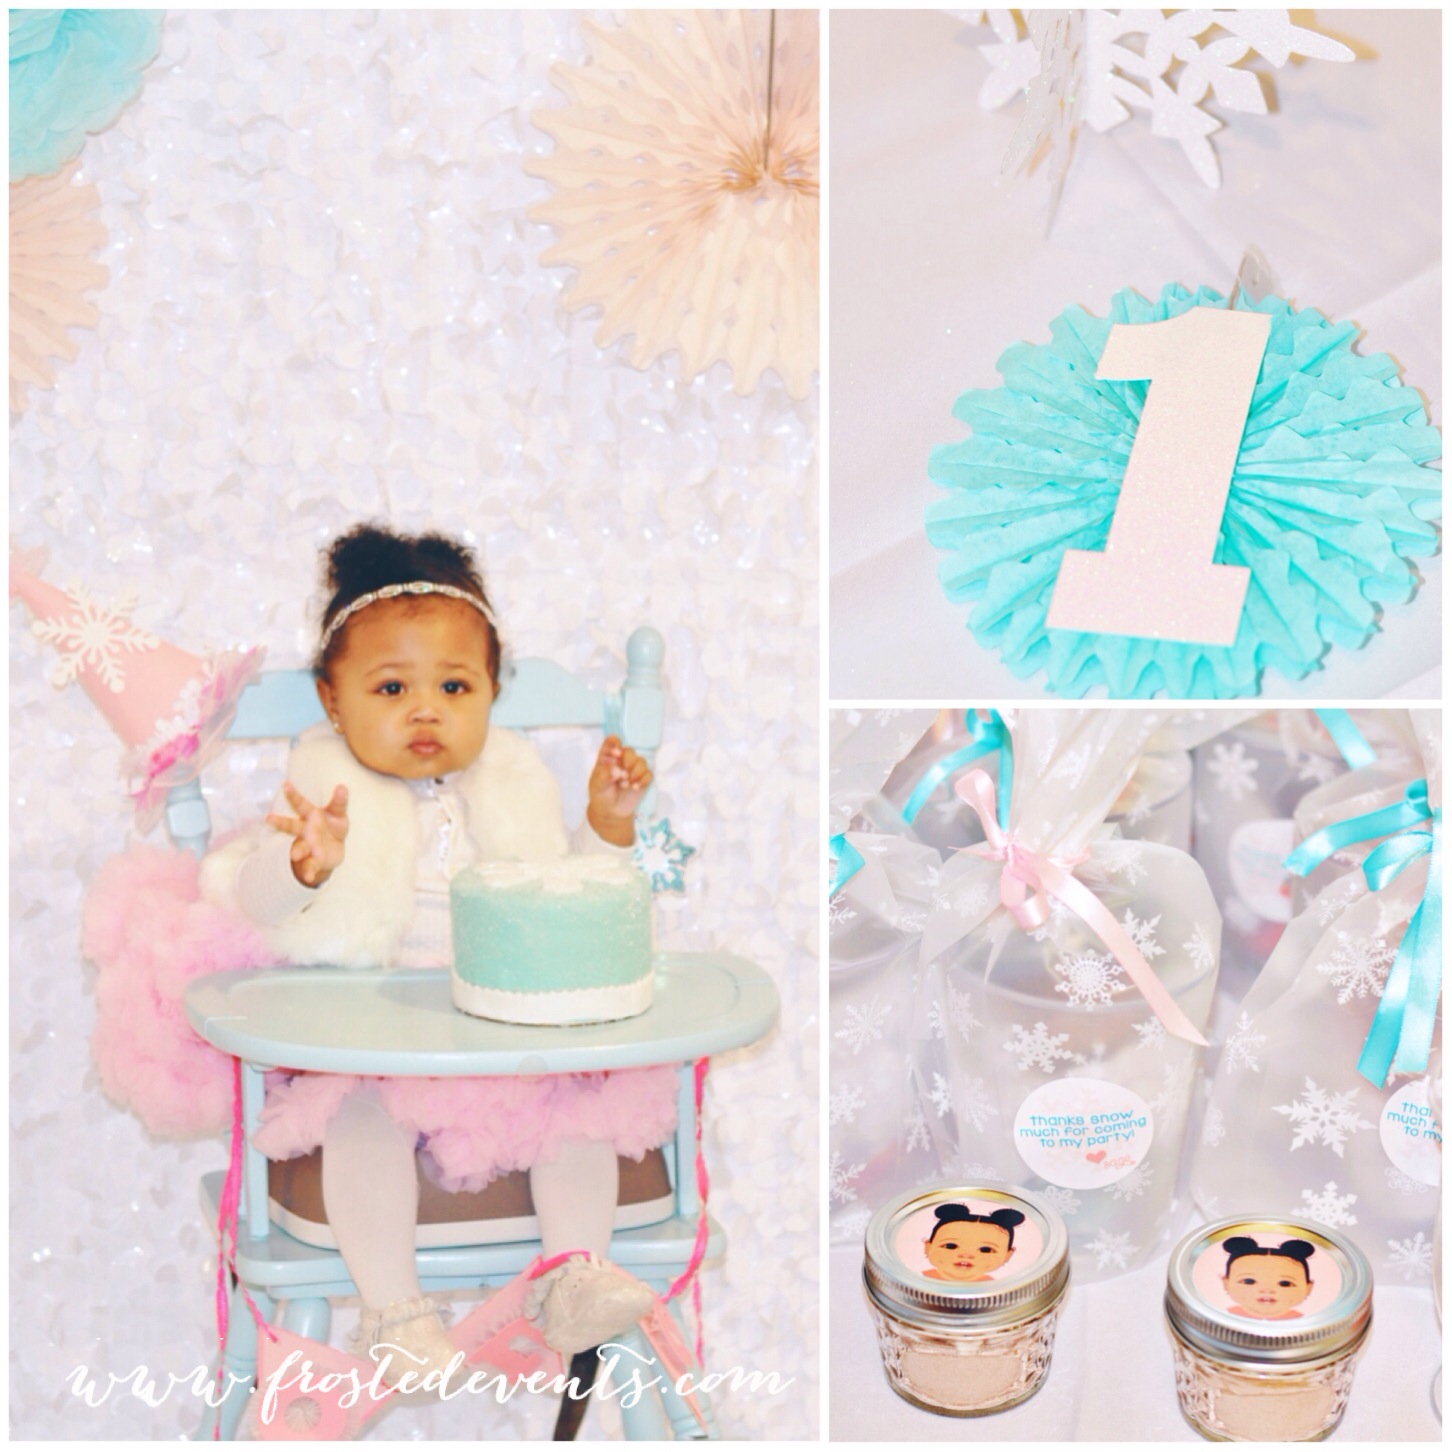 Winter-Wonderland-First-Birthday-Party by www.frostedevents.com